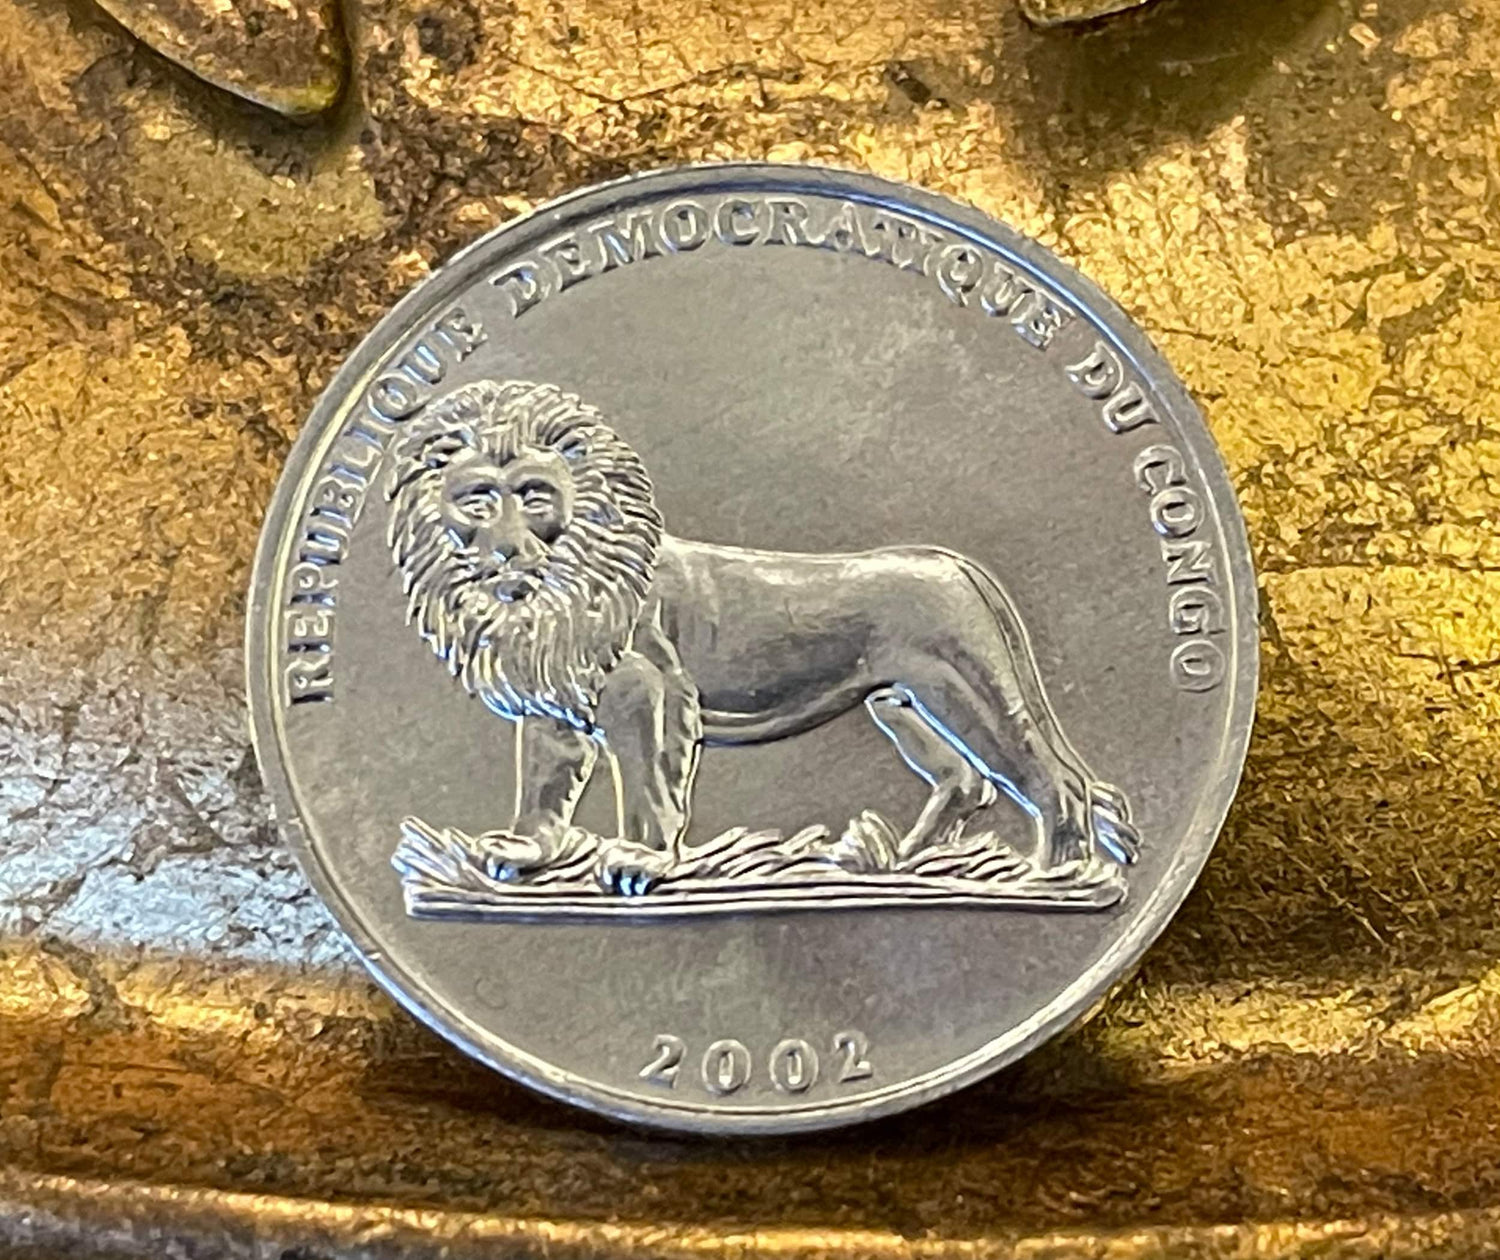 Lion & Butterfly 50 Centimes Democratic Republic of Congo Authentic Coin Money for Jewelry and Craft Making